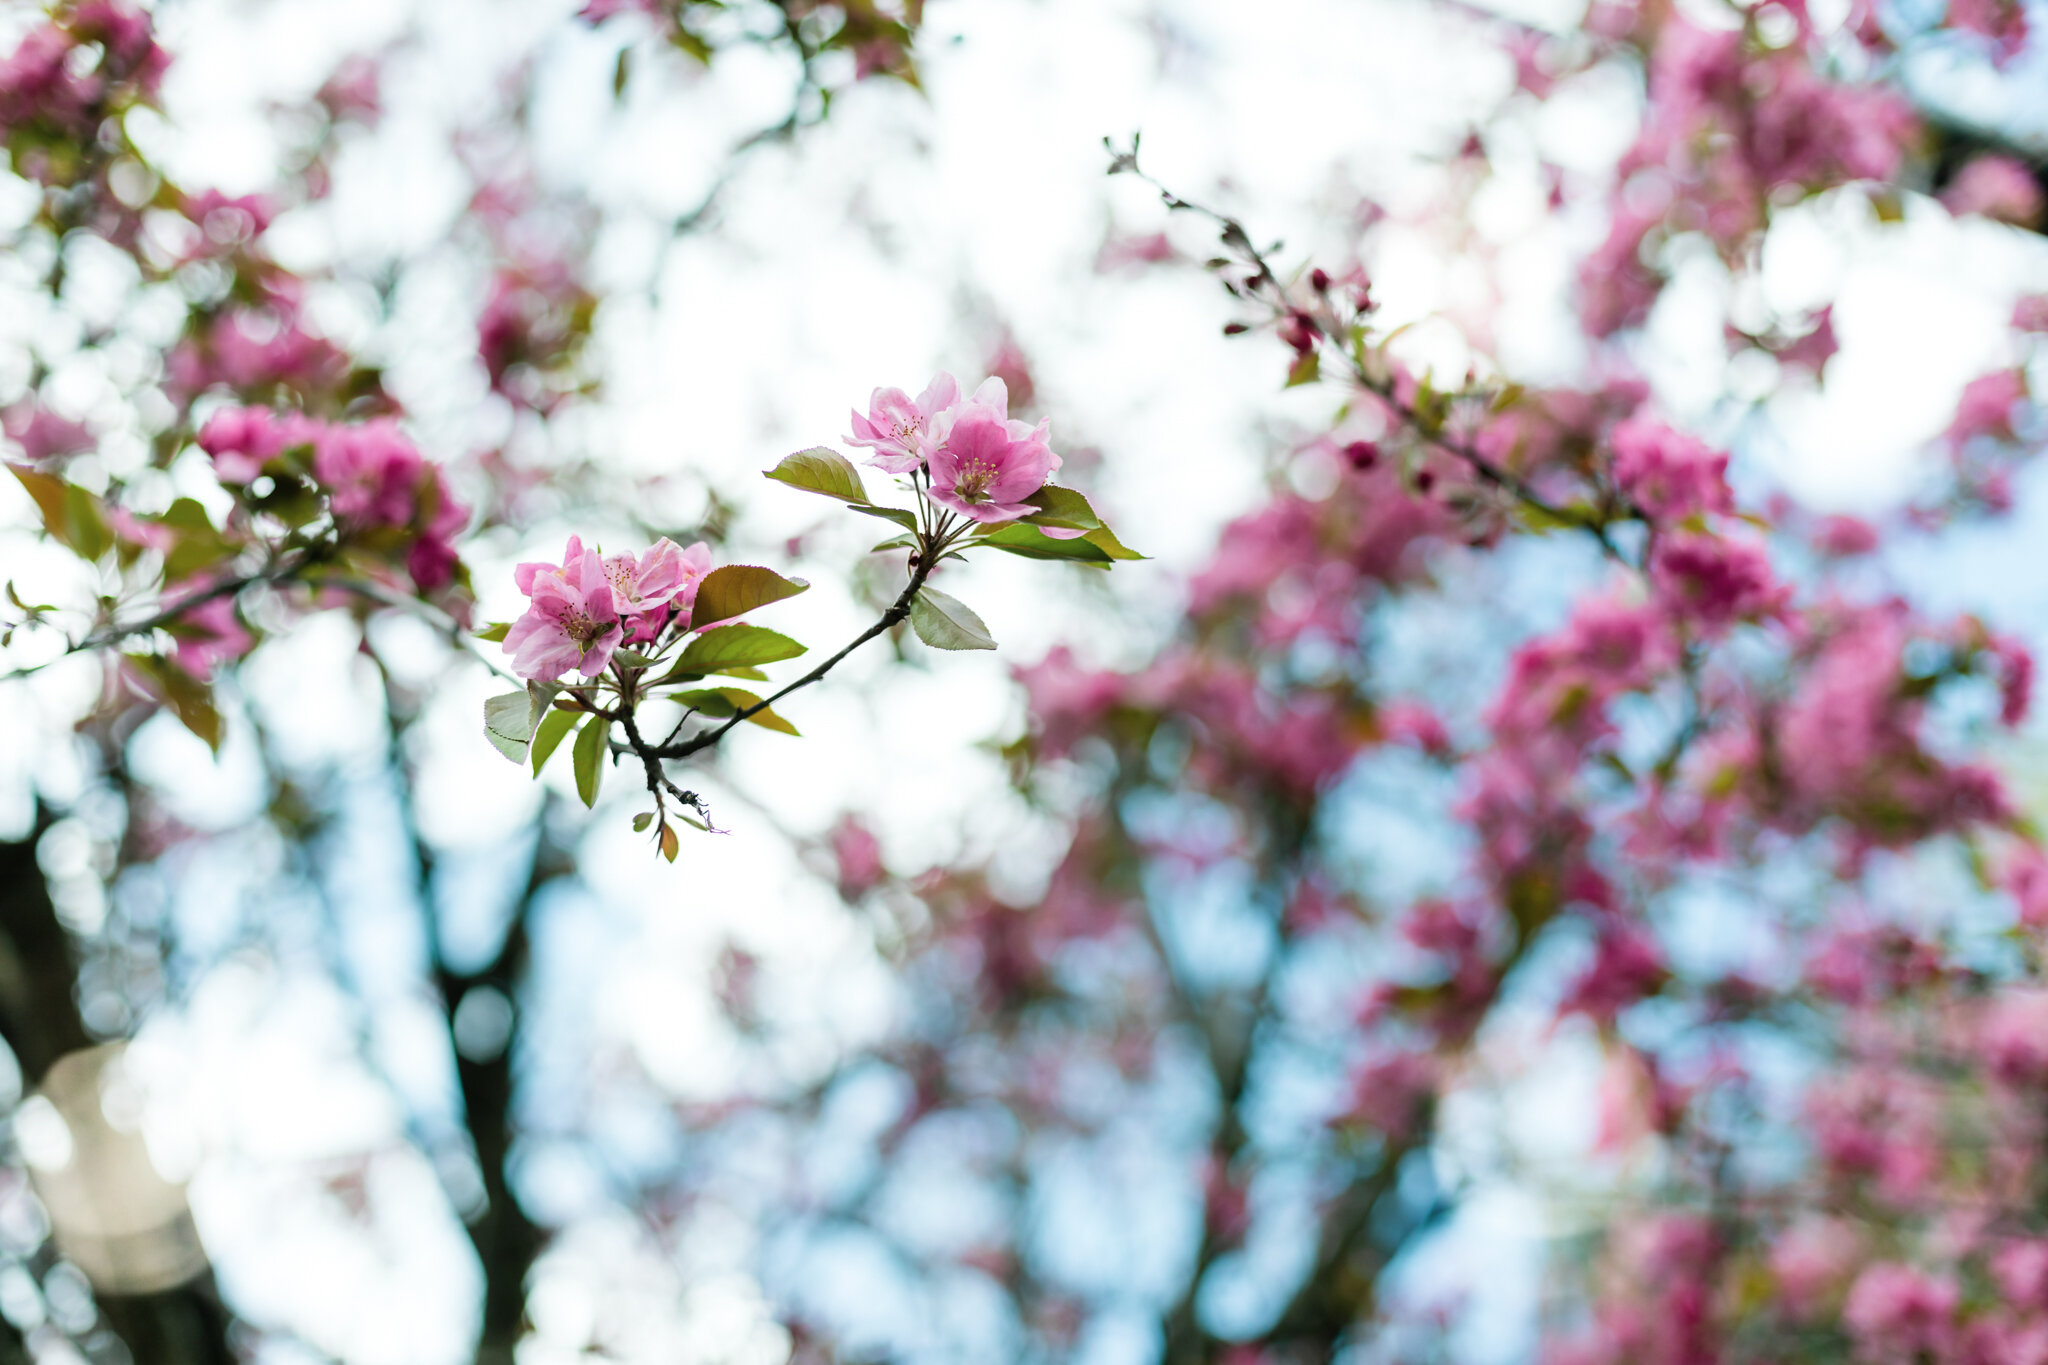  Blooms and blossoms in springtime | Colorful nature photography by Lenka Vodicka Lenkaland 